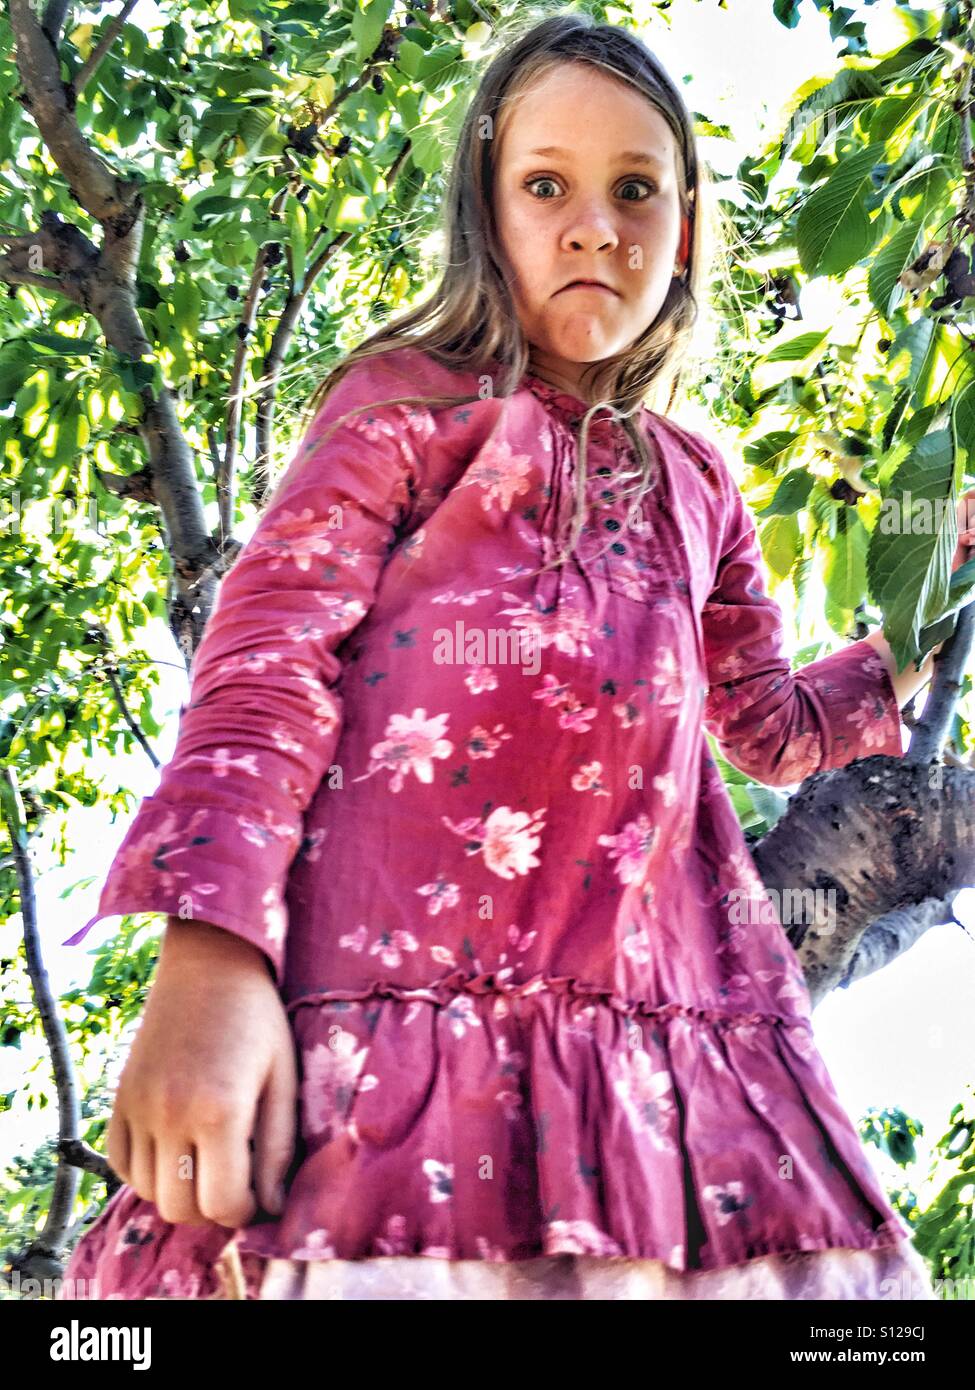 Very unhappy little girl in a cherry tree. Stock Photo